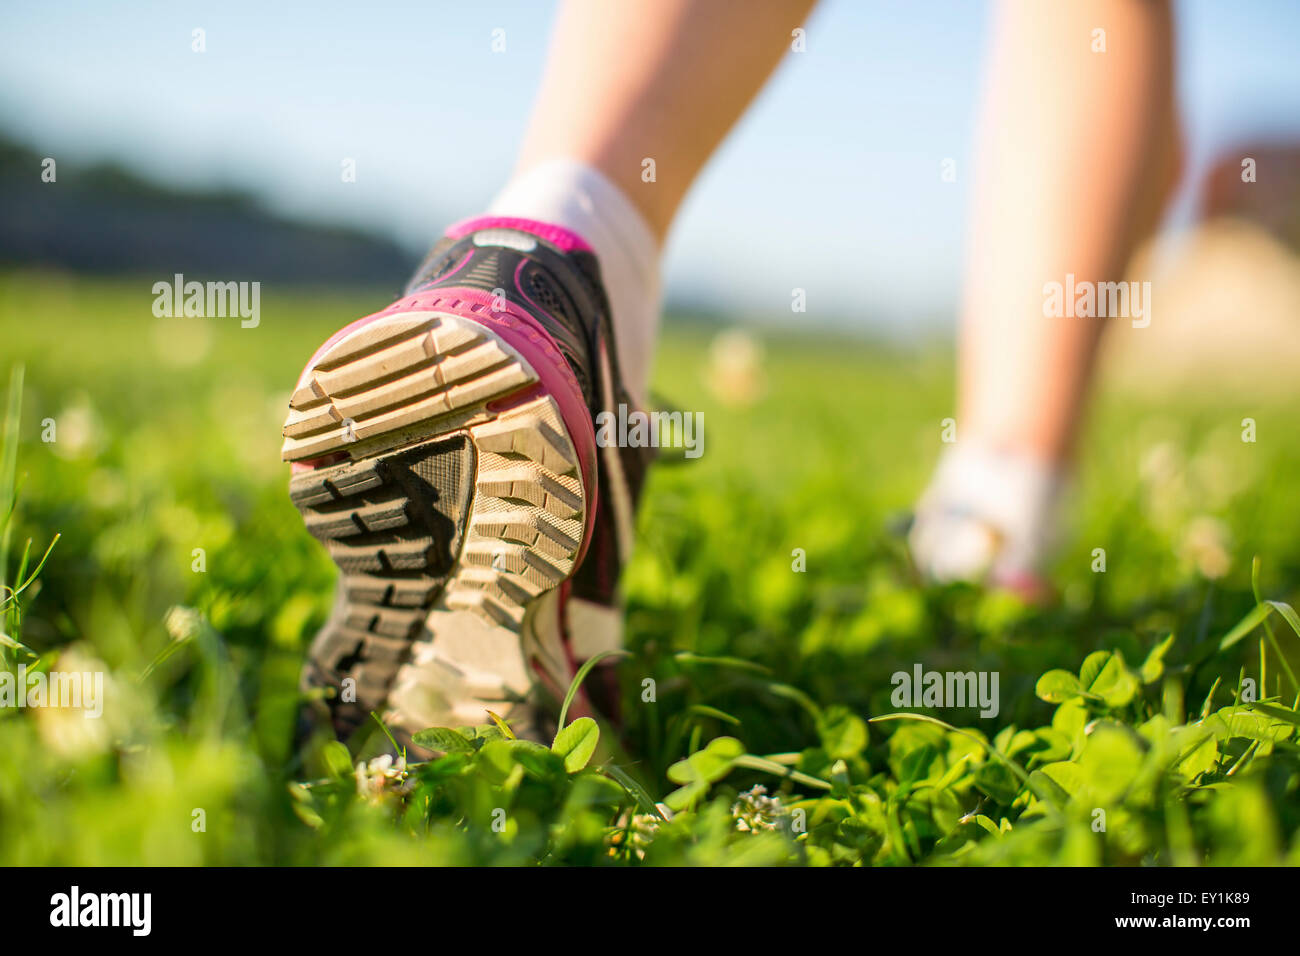 Close-up sole running shoe on green grass in a sunny day. Stock Photo